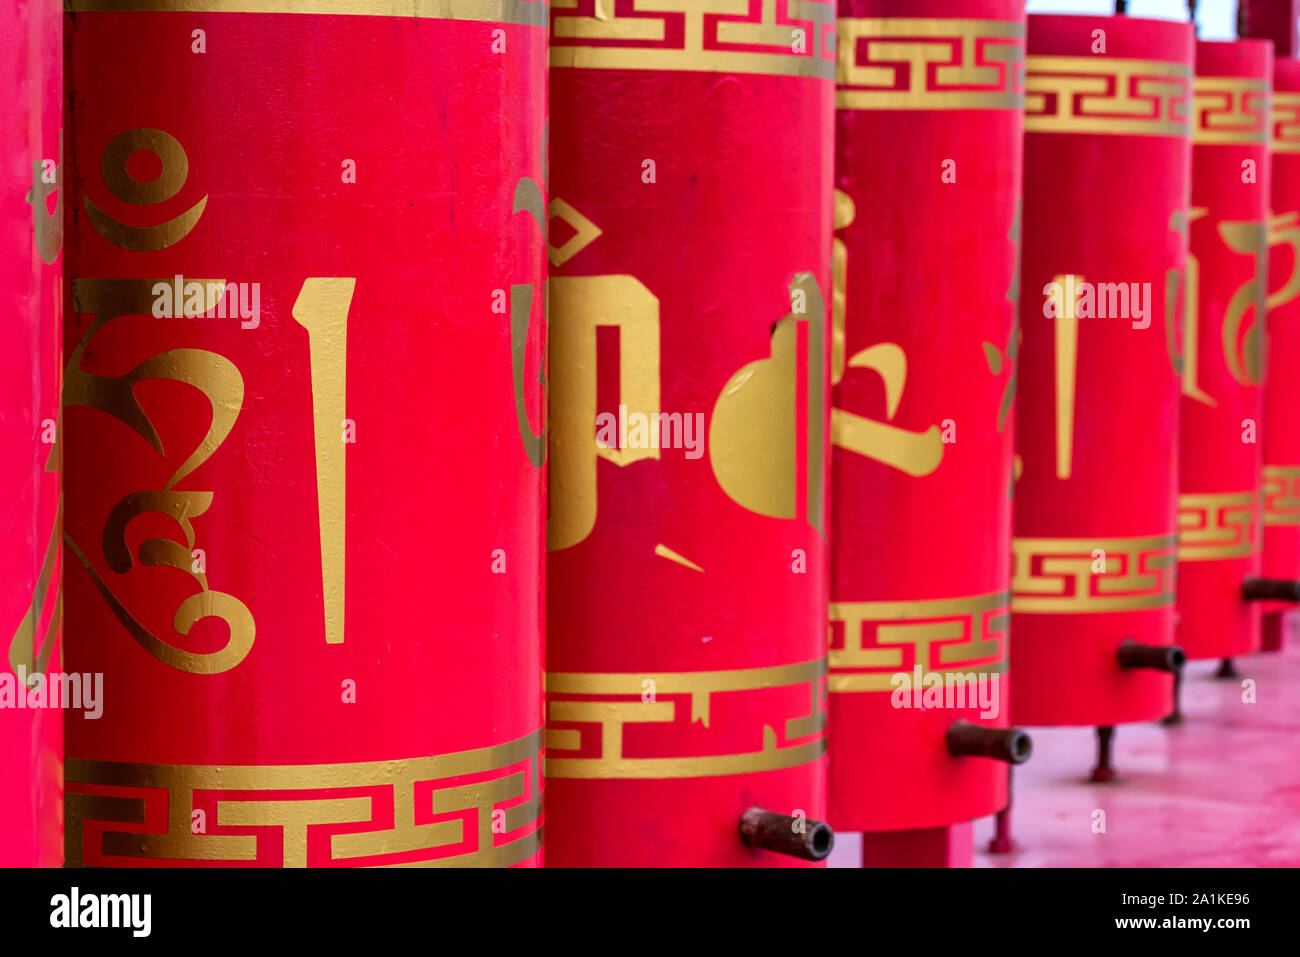 ELISTA, RUSSIA - MAY 5, 2018: Close up row of red buddhist prayer wheels with golden text on them. Elista is the capital of Kalmykia Republic with 103 Stock Photo